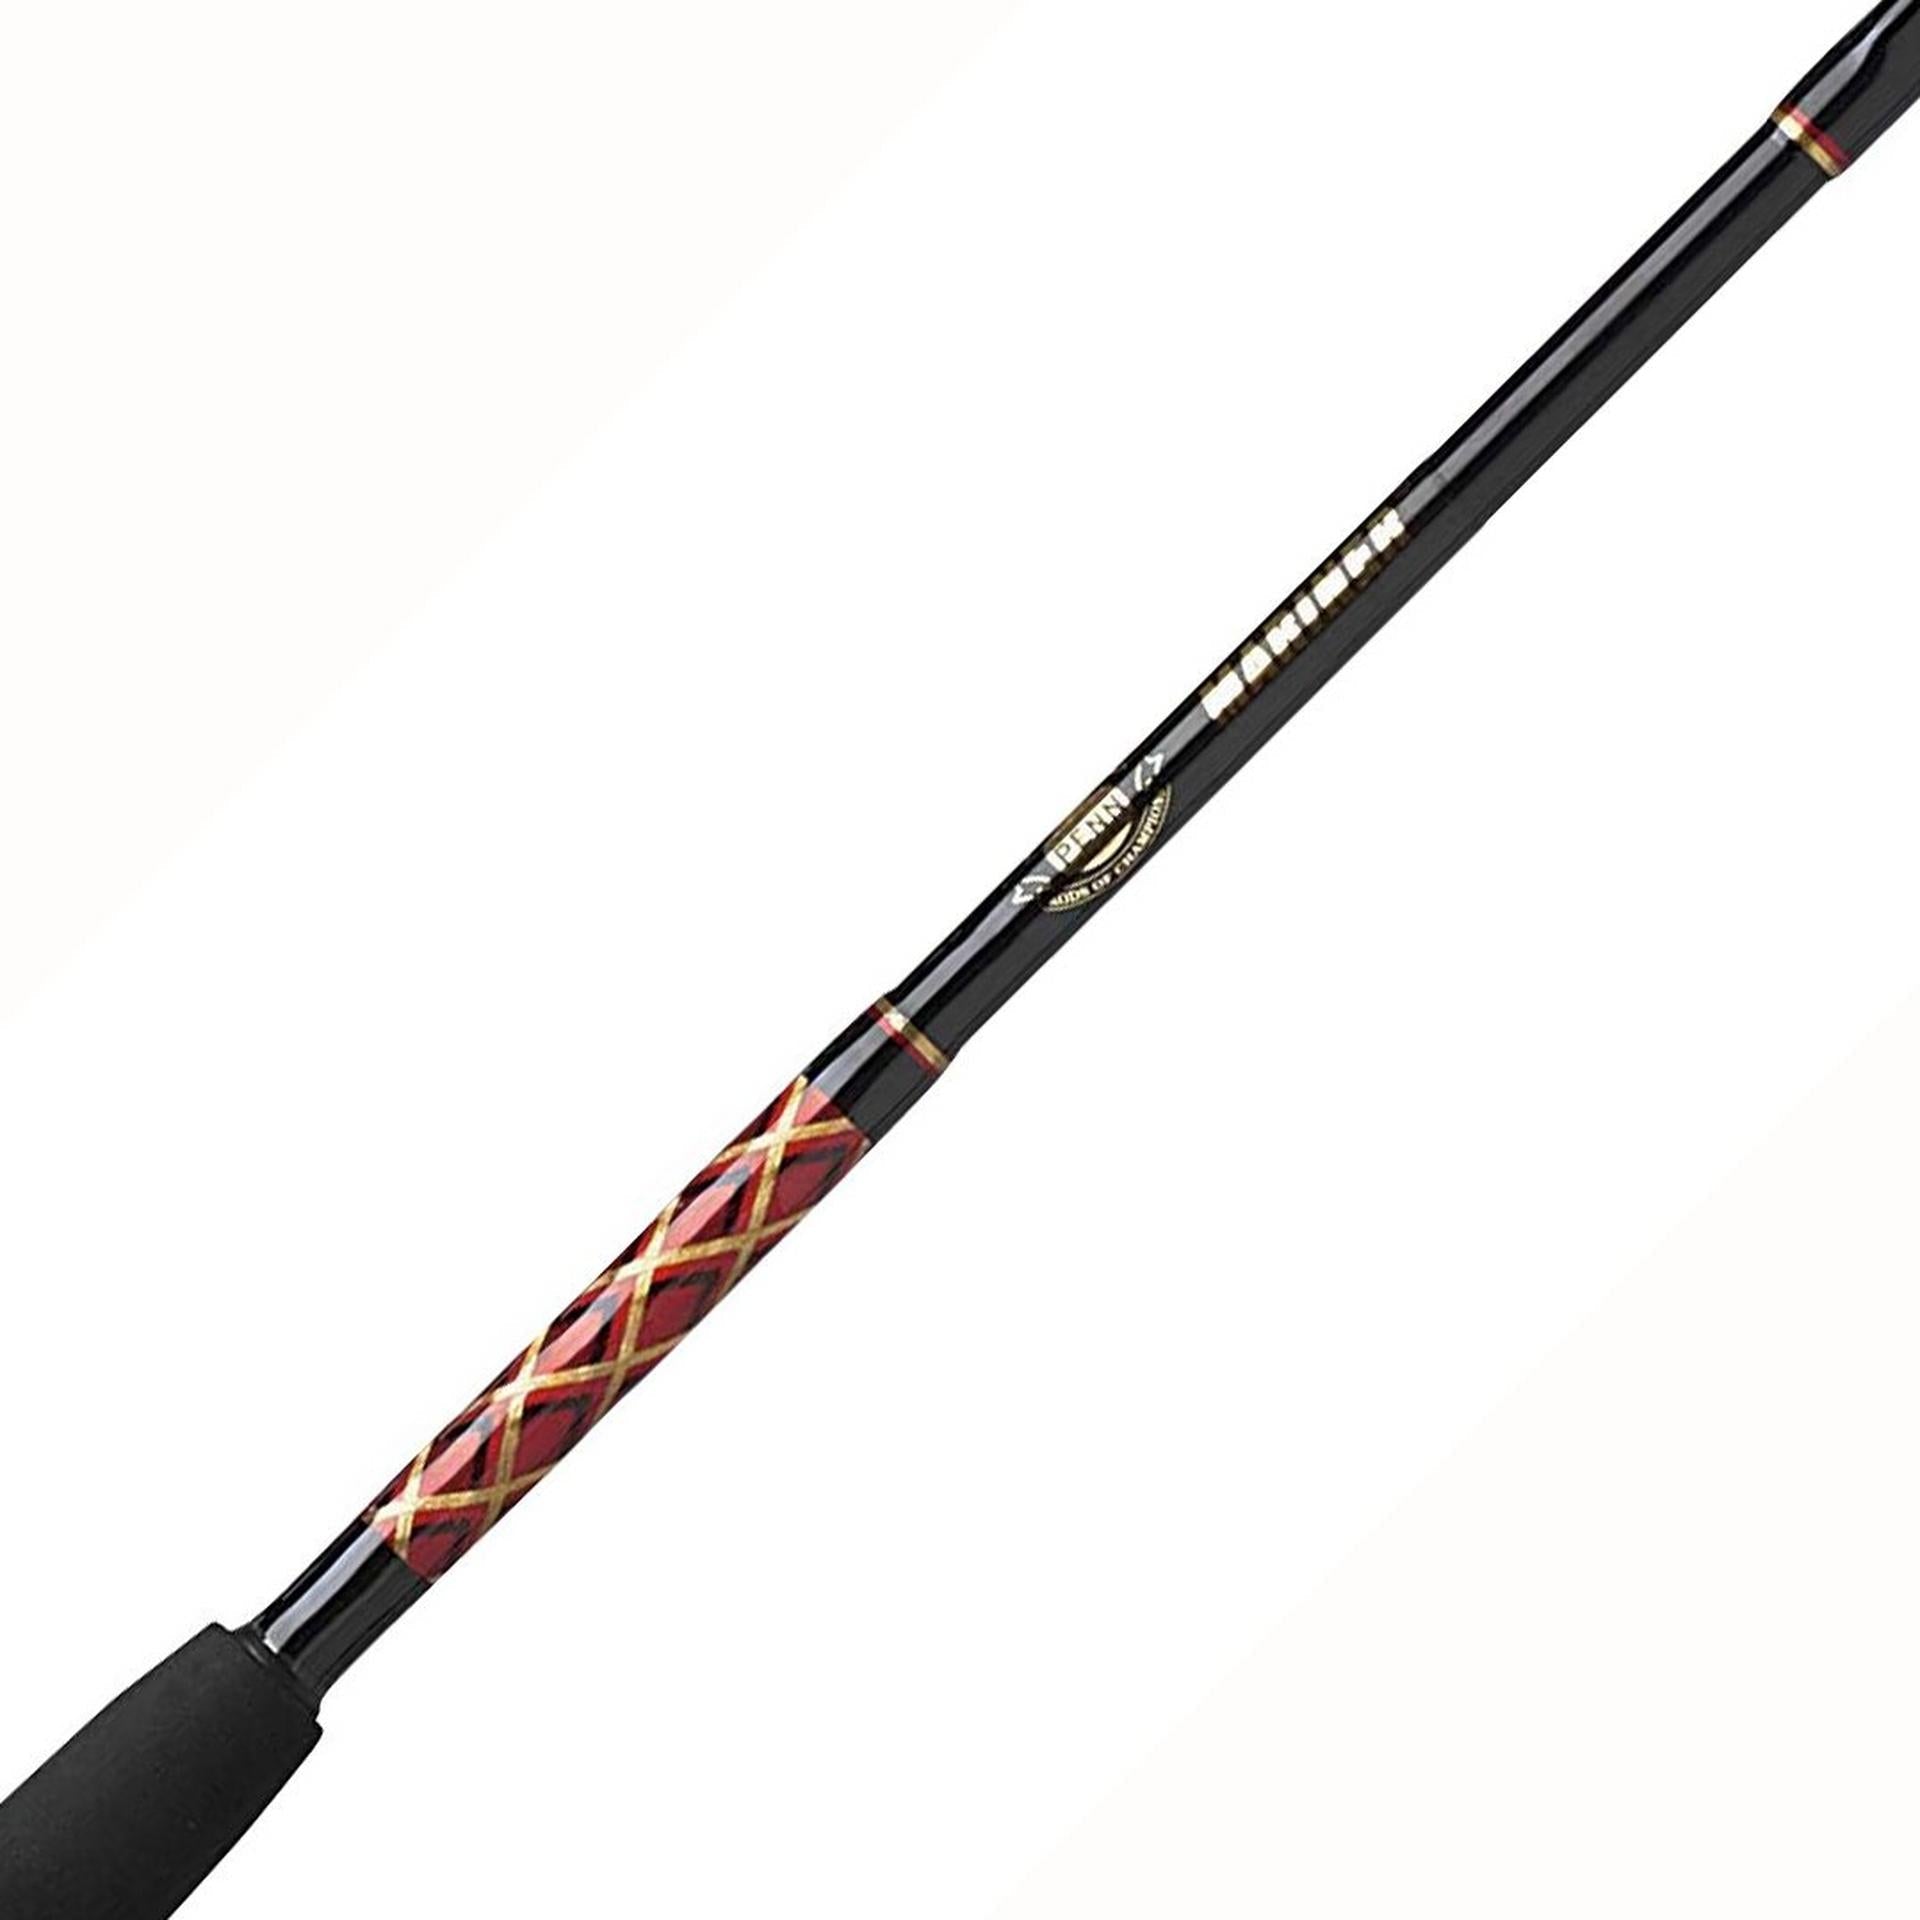 General Purpose Conventional Rod & Reel Combo